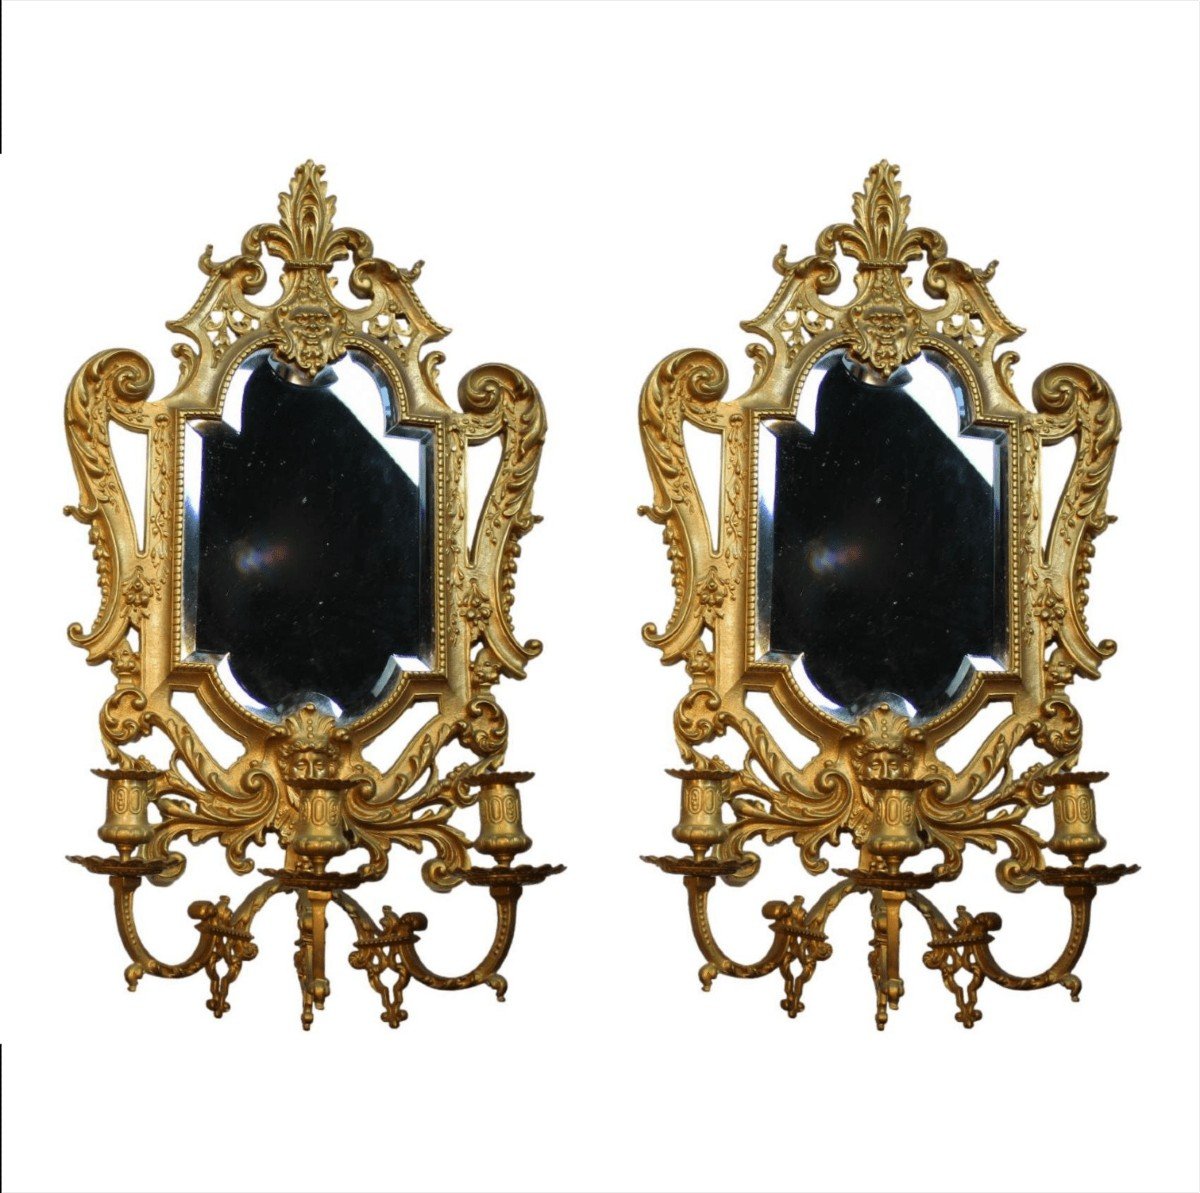 Pair Of Mirrors In Gilded Bronze With 3-light Candlesticks From Napoleon III Period